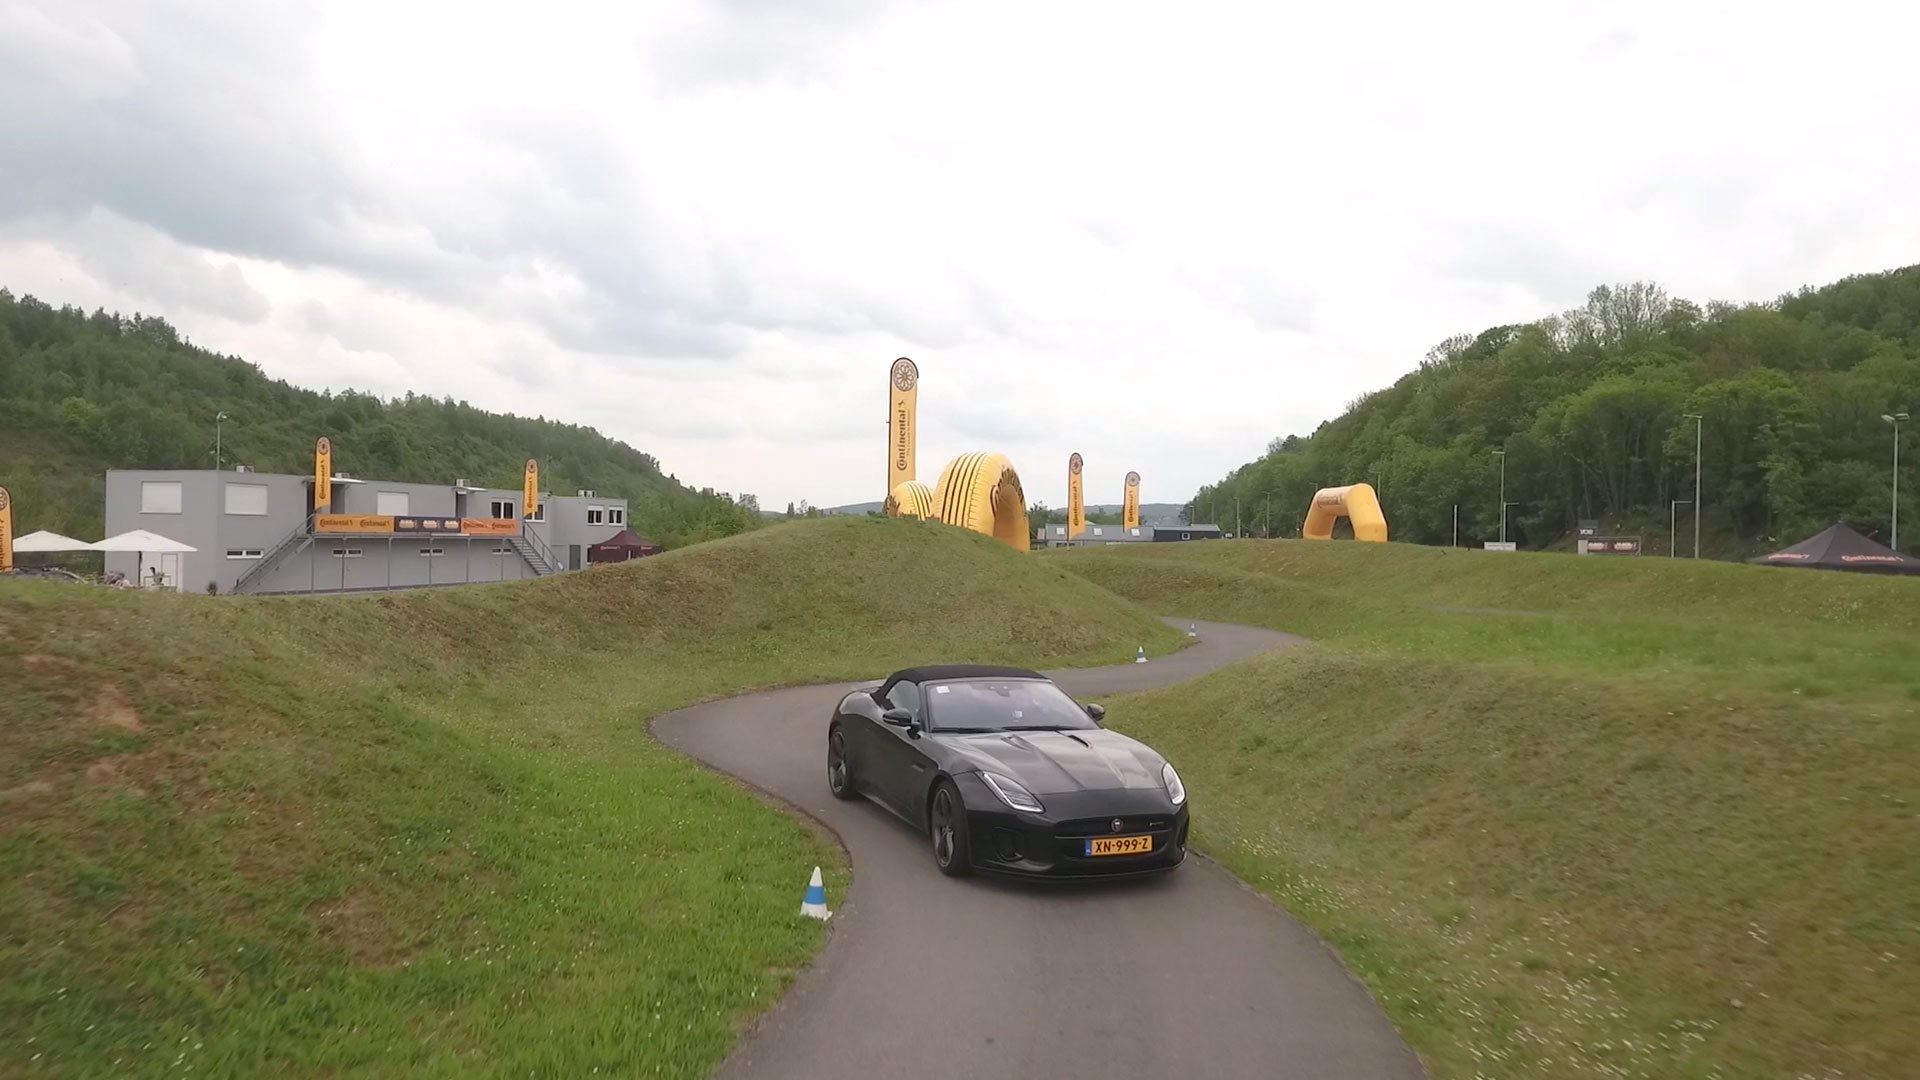 Continental Black Chili Driving Experience 2019